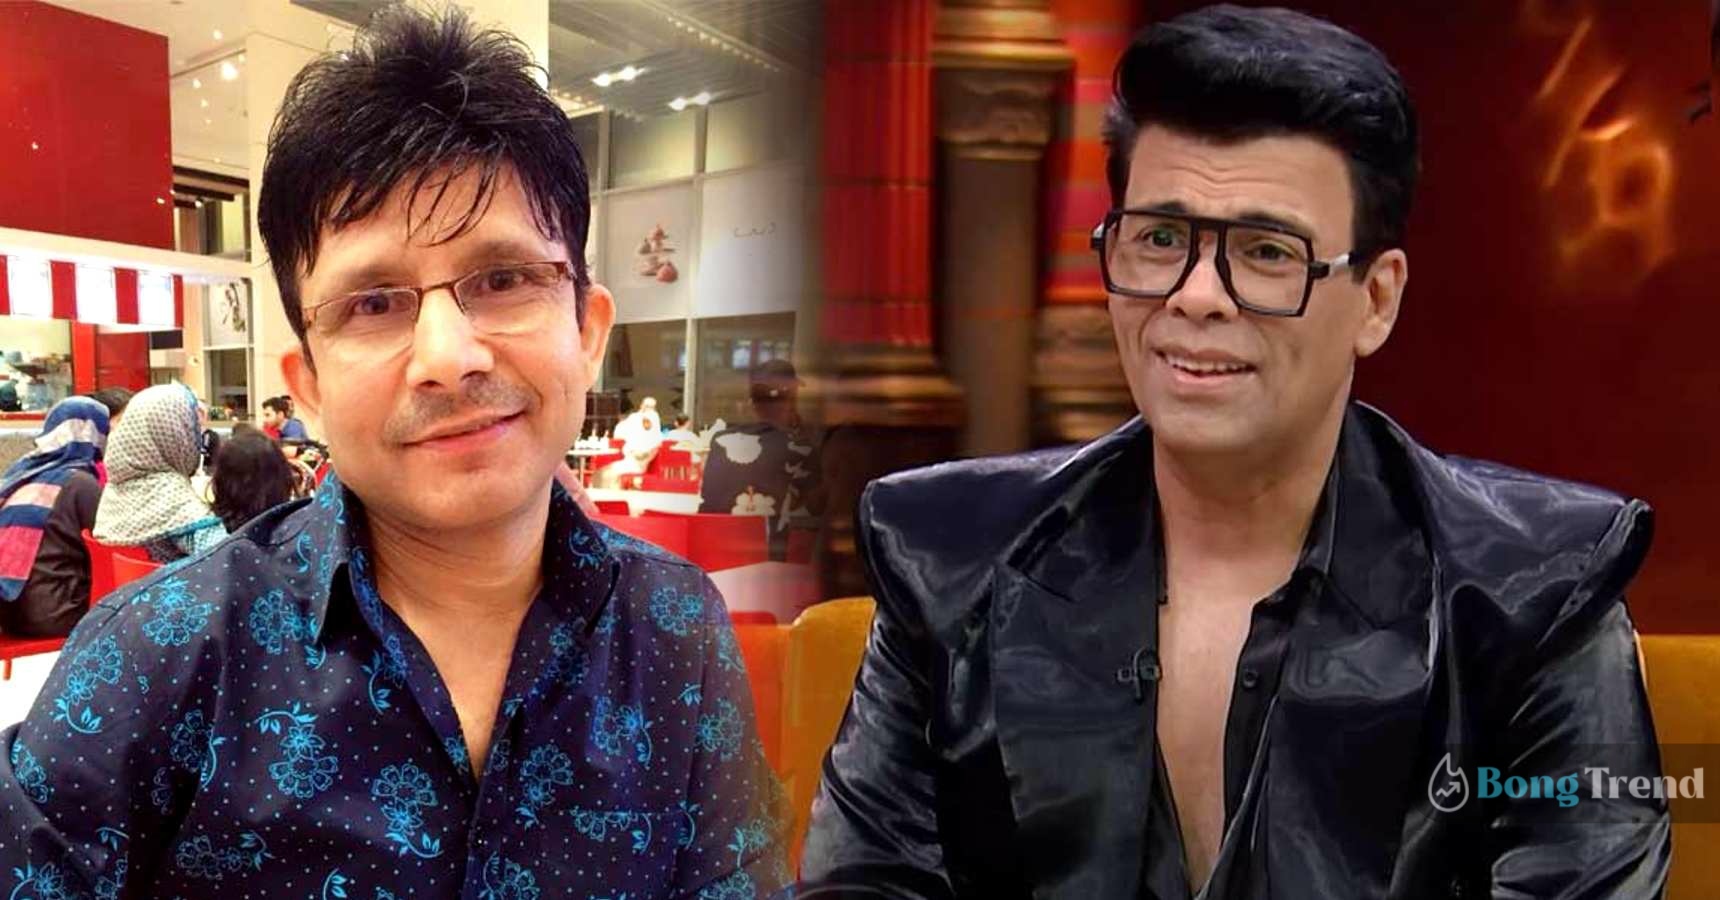 KRK was supposed to change sex and marry Karan Johar back in 2014